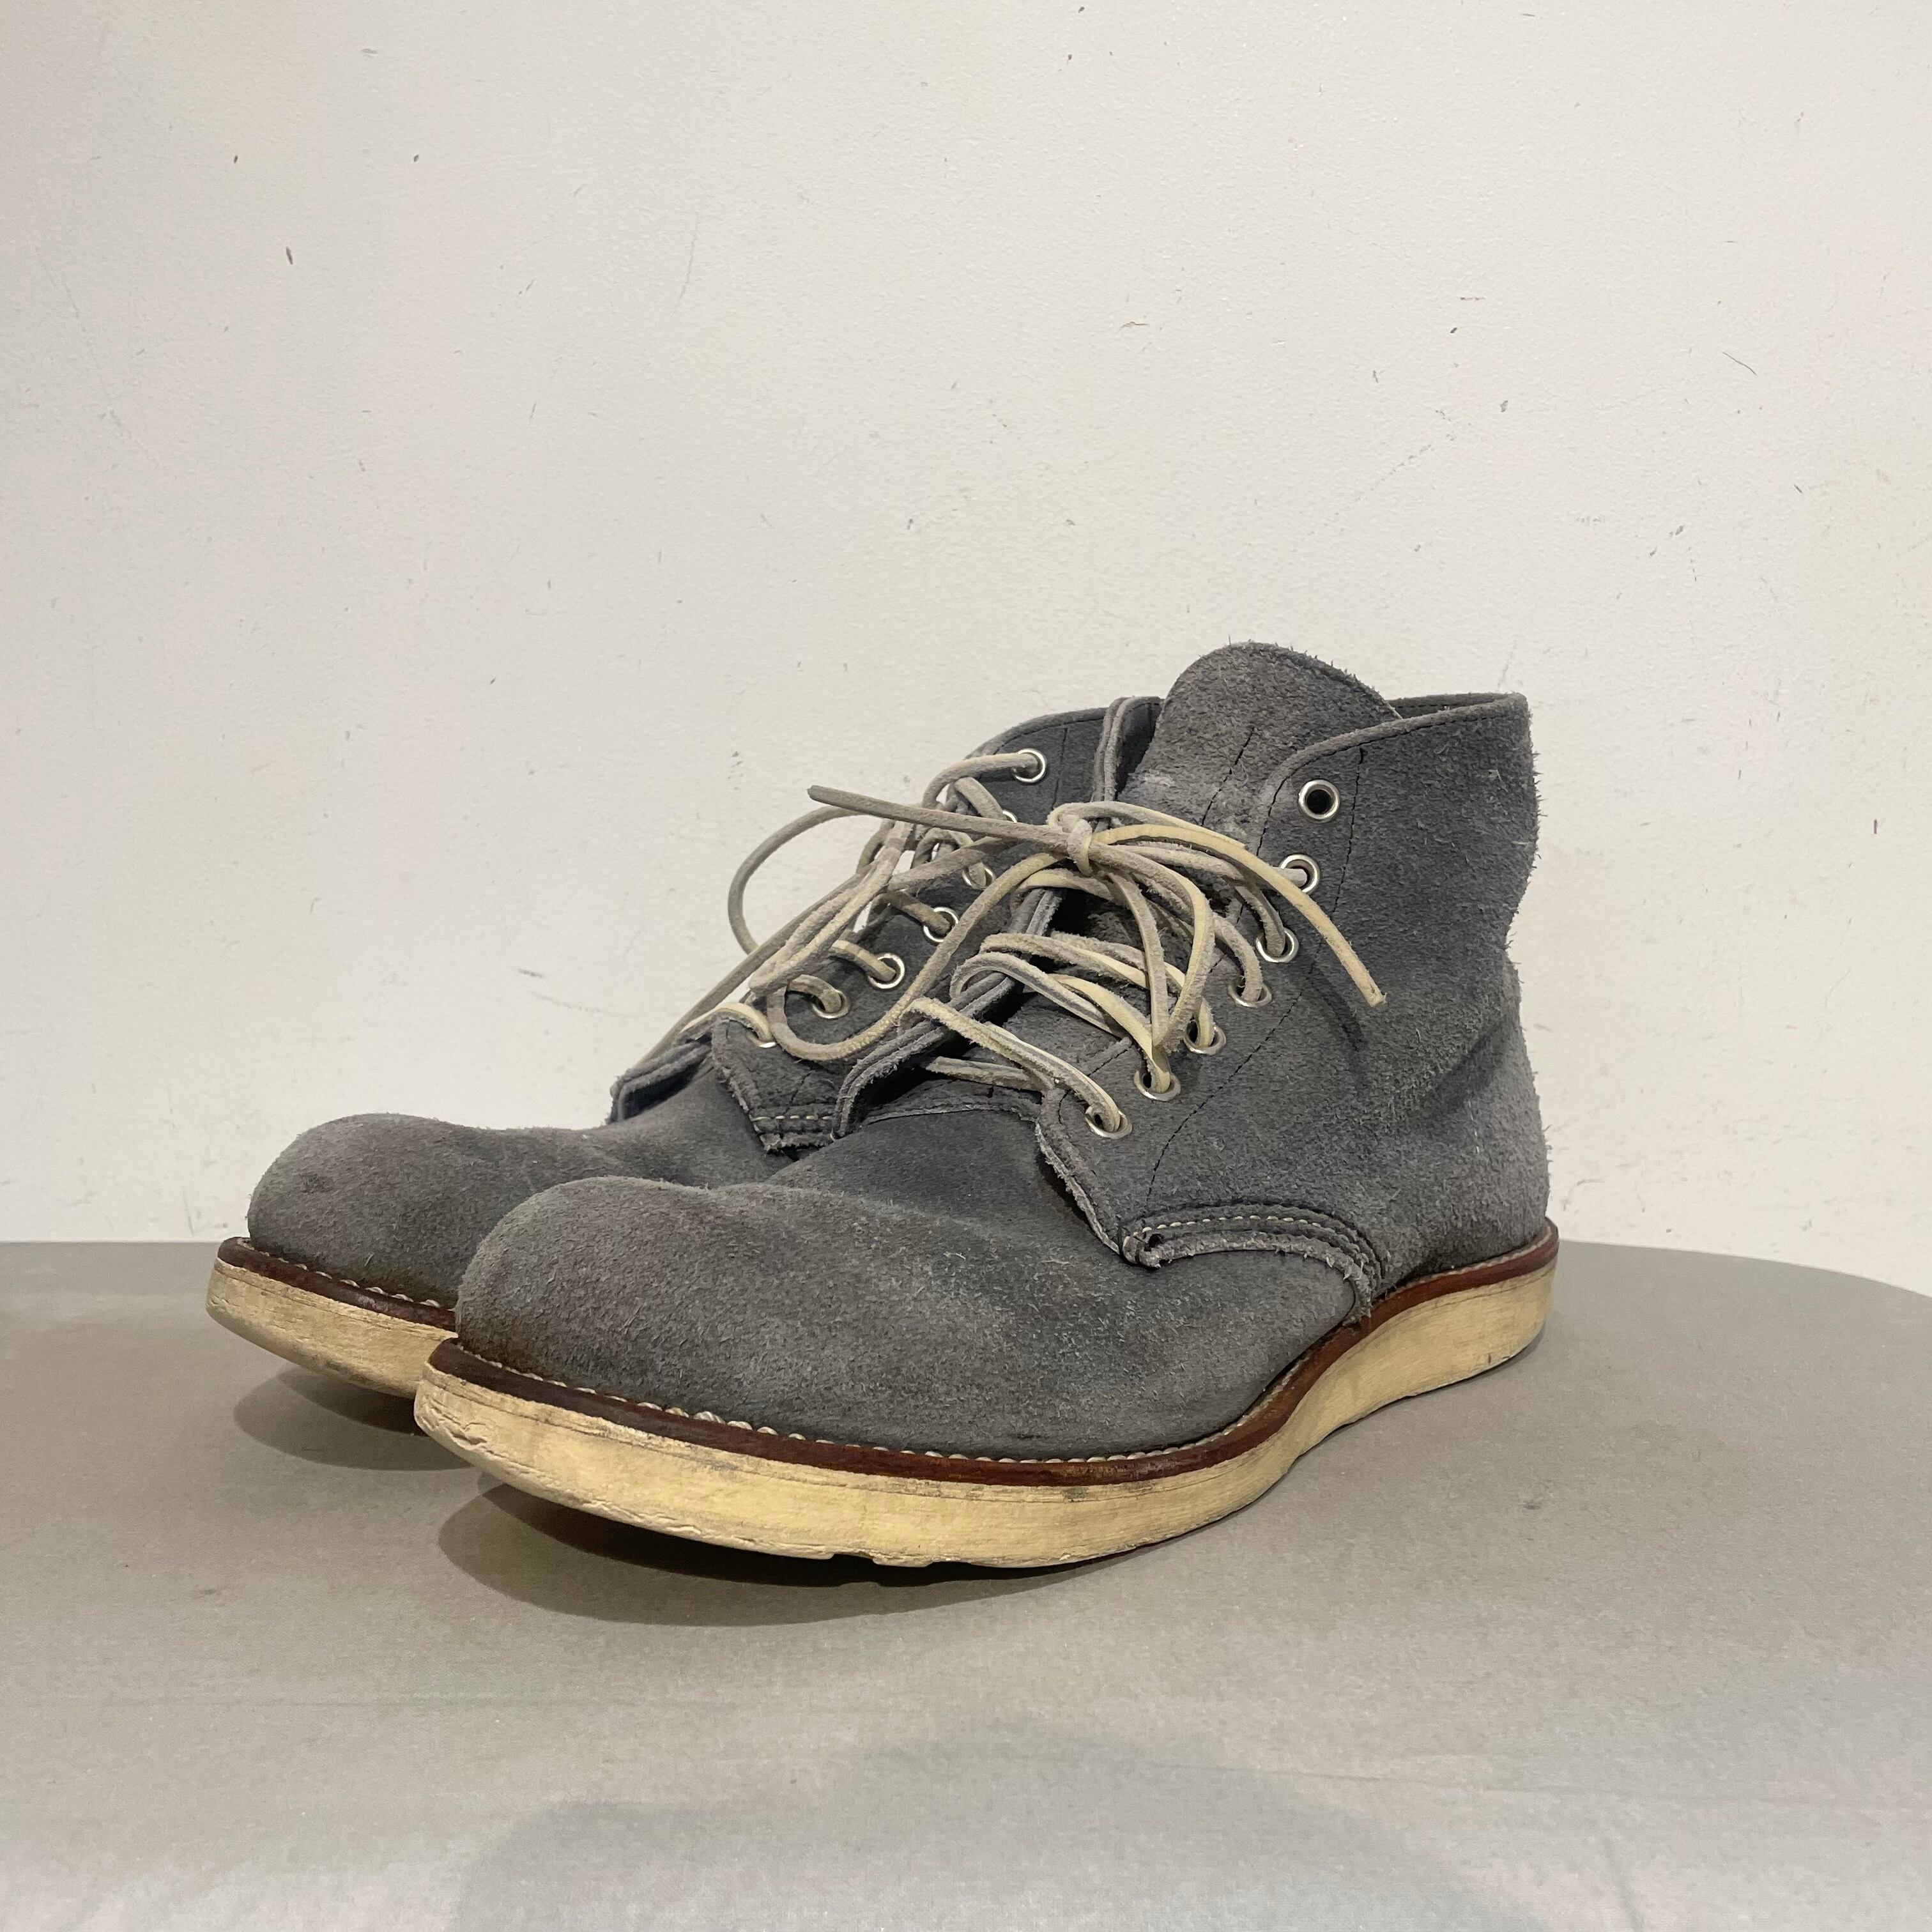 Red Wing 8144/boots/gray/レッドウィング8144/ブーツ/灰色 | ＵＴＡ５